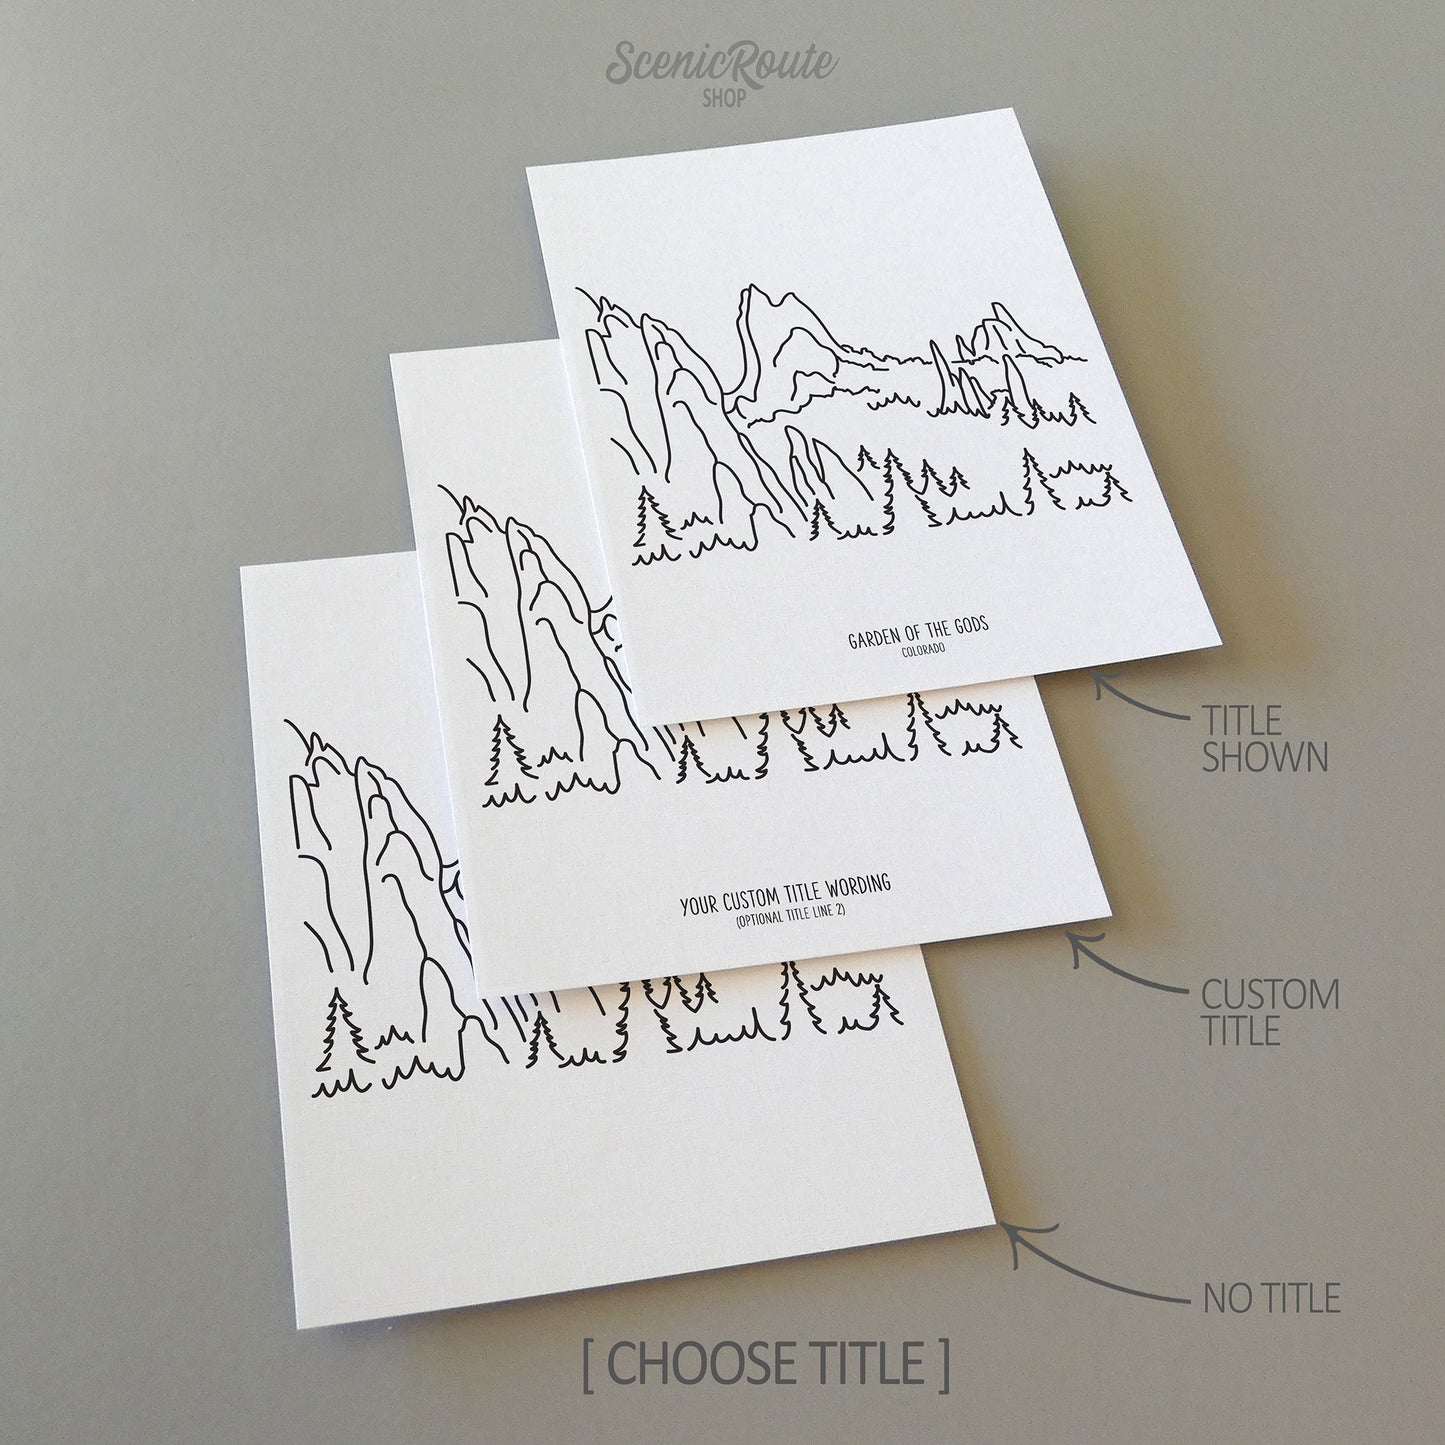 Three line art drawings of the Garden of the Gods in Colorado on white linen paper with a gray background.  The pieces are shown with title options that can be chosen and personalized.